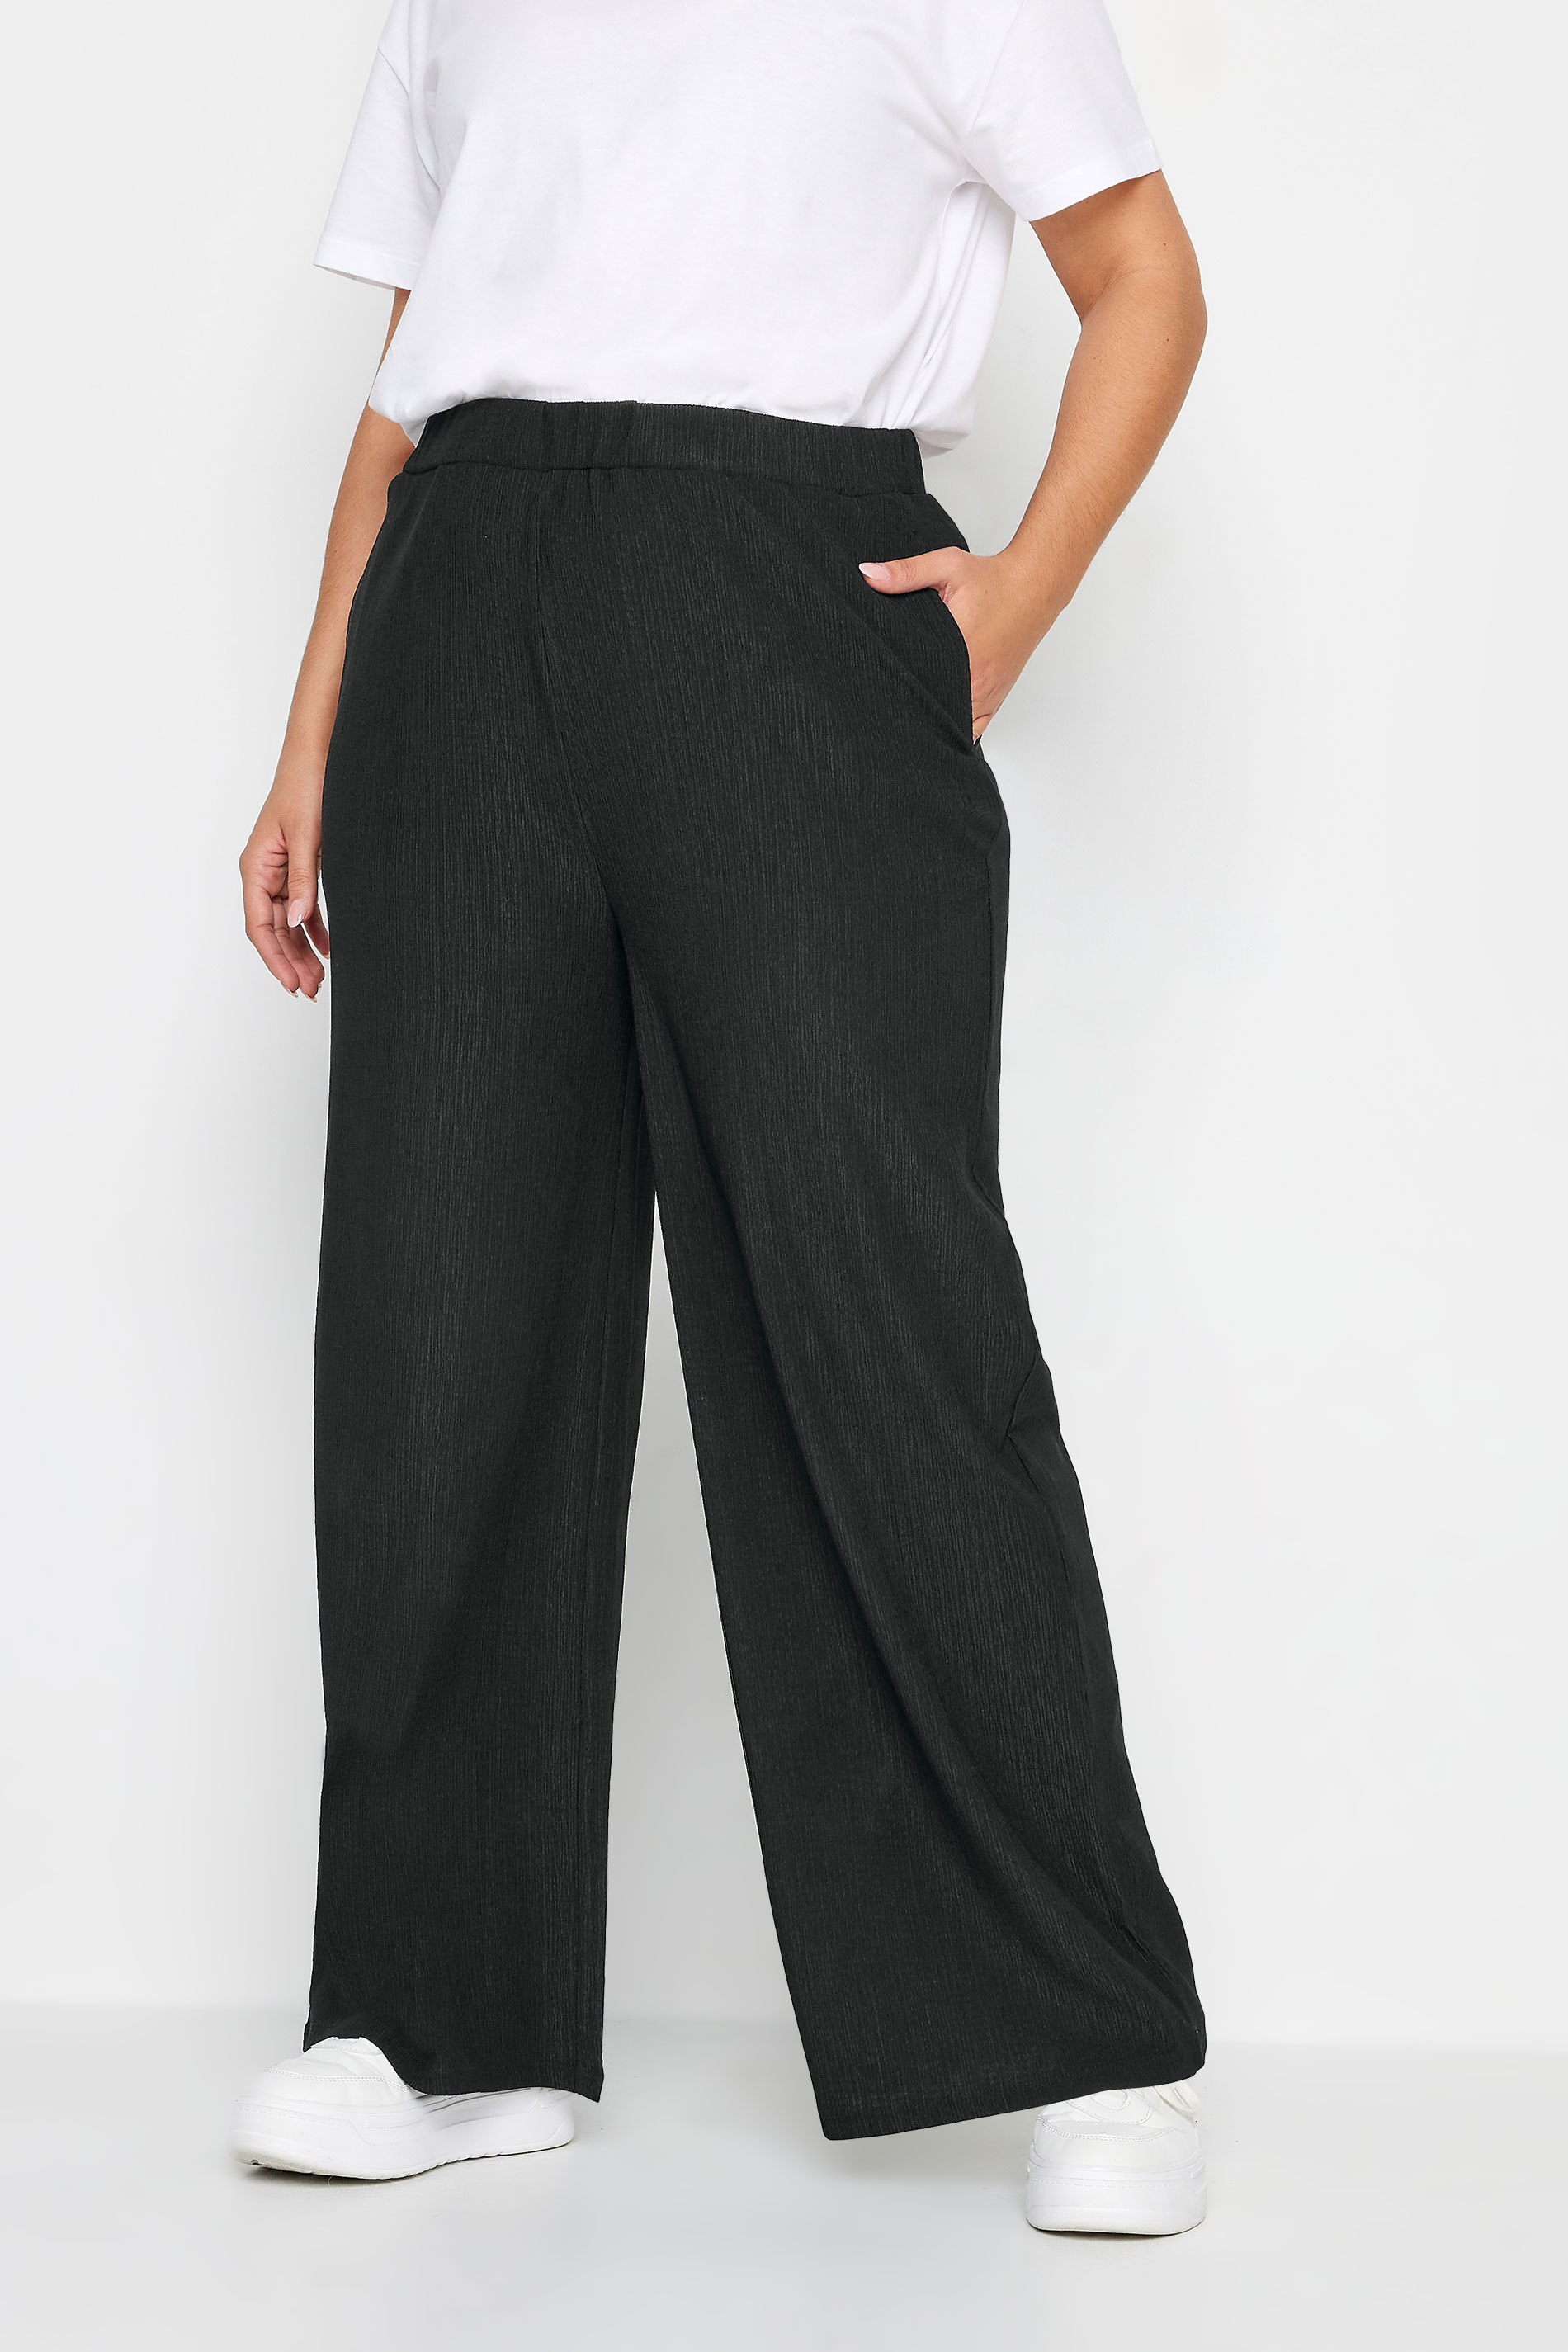 YOURS Plus Size Black Textured Wide Leg Trousers | Yours Clothing 2